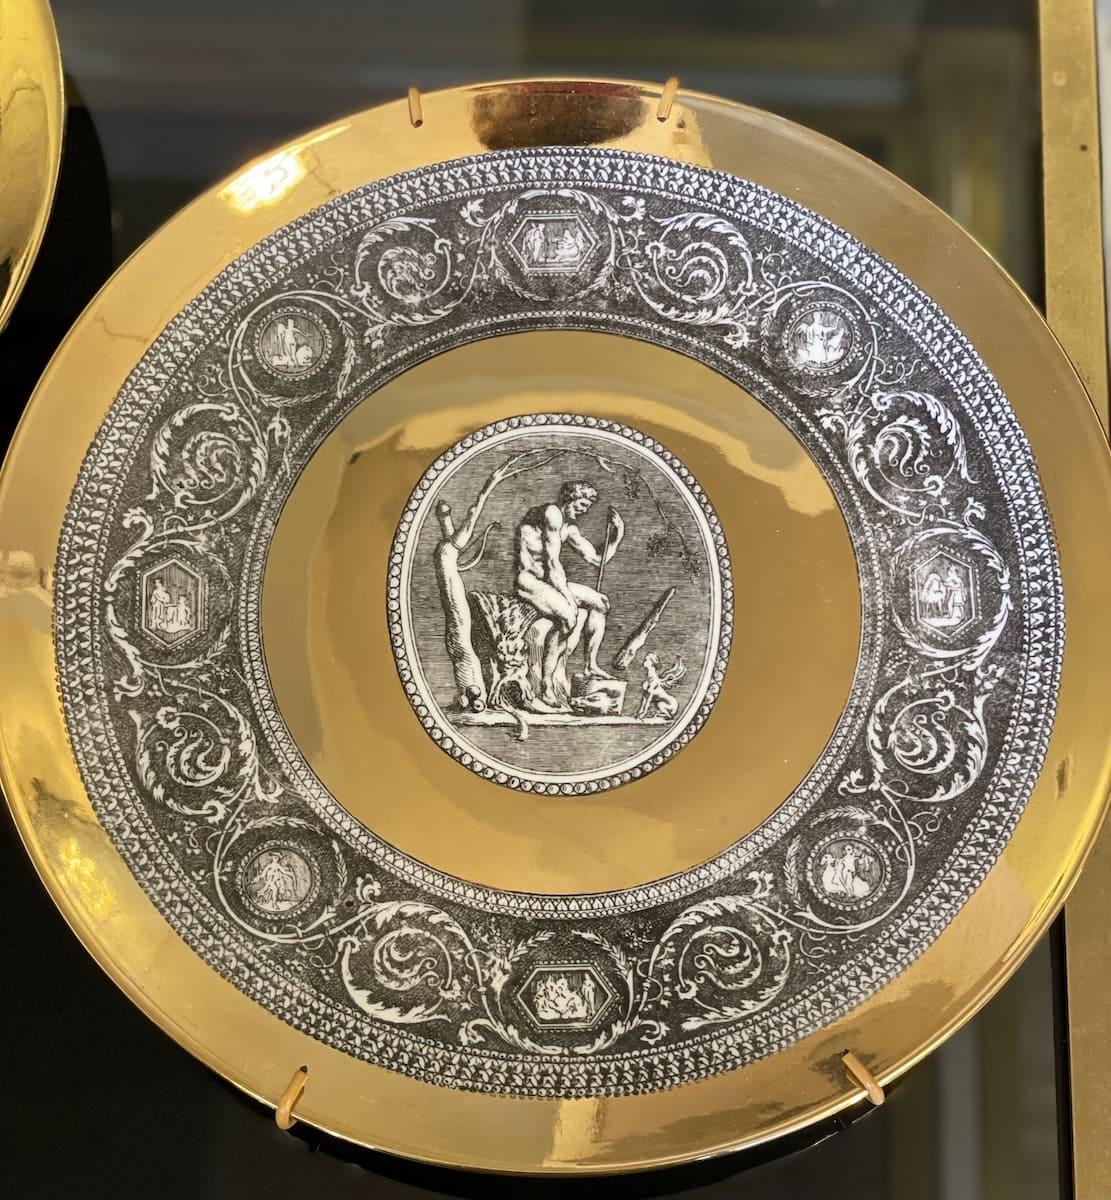 1960s Fornasetti Cammei Mythological Collection Gold Leaf Plates Signed Set of 6

Fornasetti 1960s 'Cammei' series porcelain plates decorated with pure gold leaf, set of 6. Designed and signed by Piero Fornasetti, each plate depicts a mythological